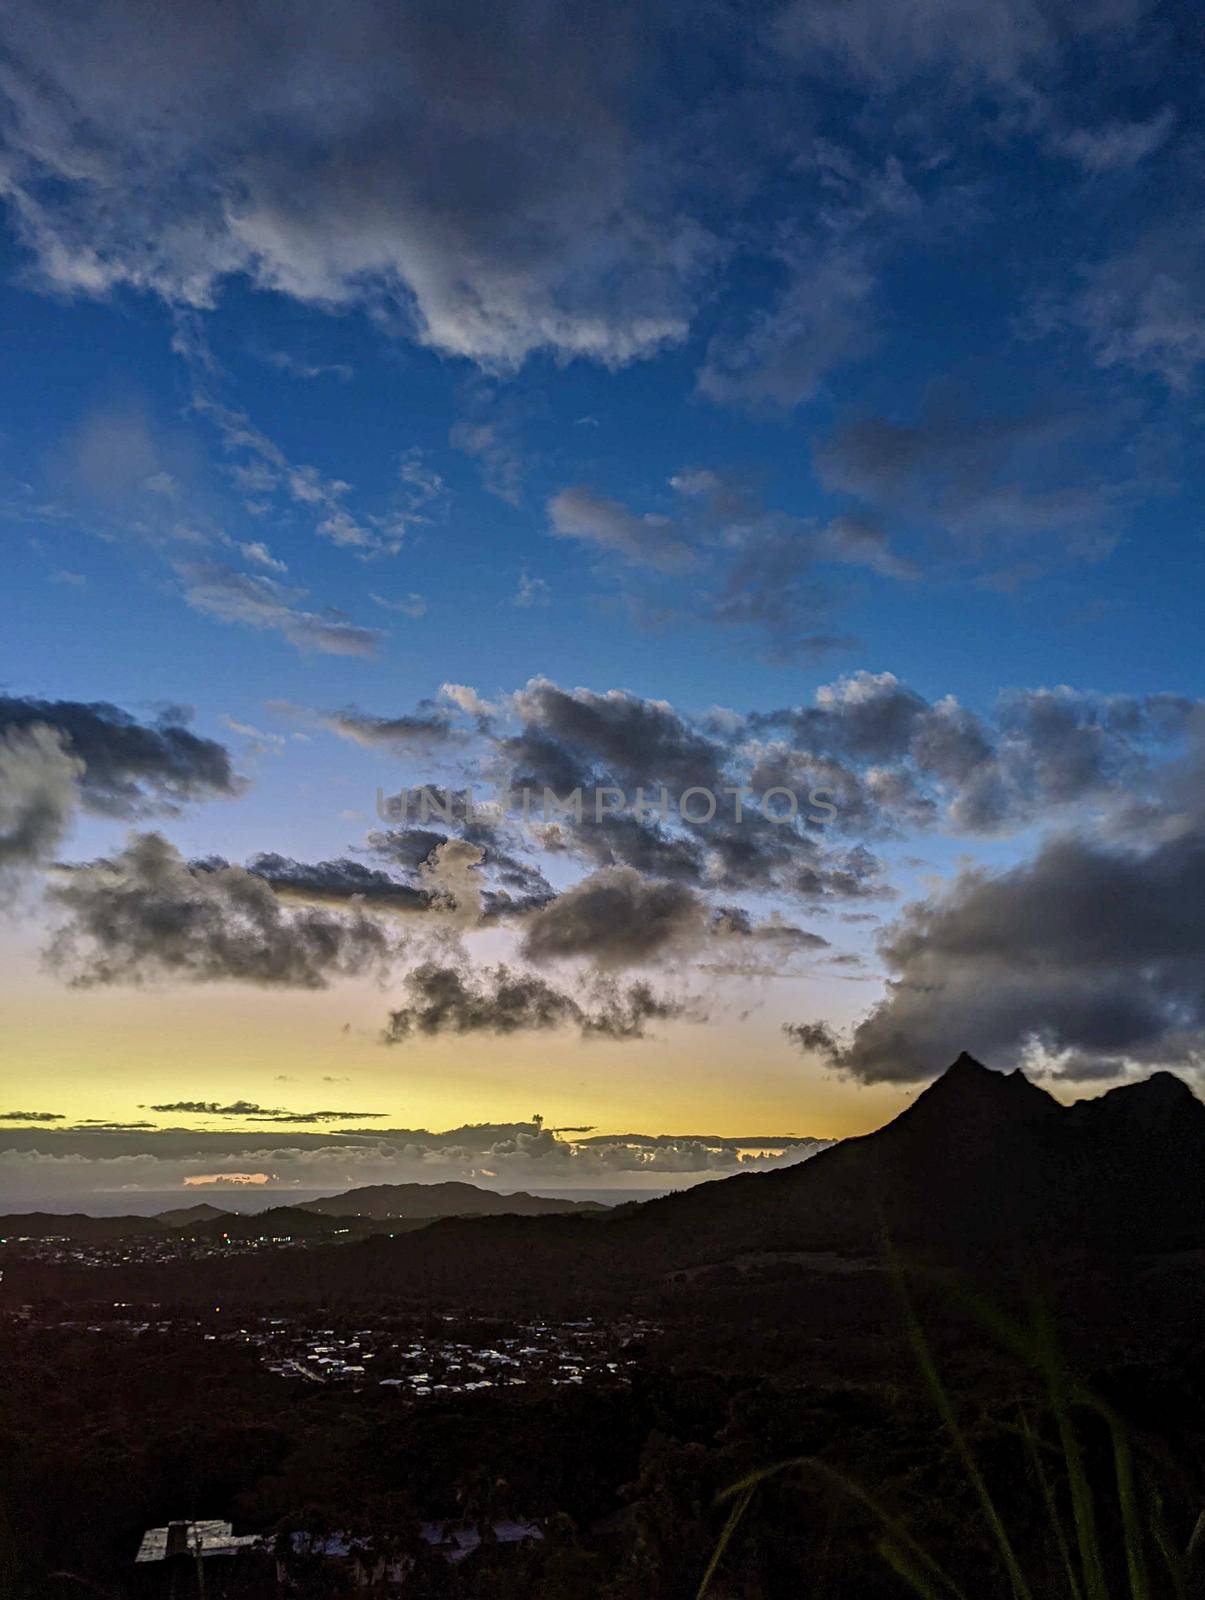 pali look out scenes in oahu hawaii by digidreamgrafix